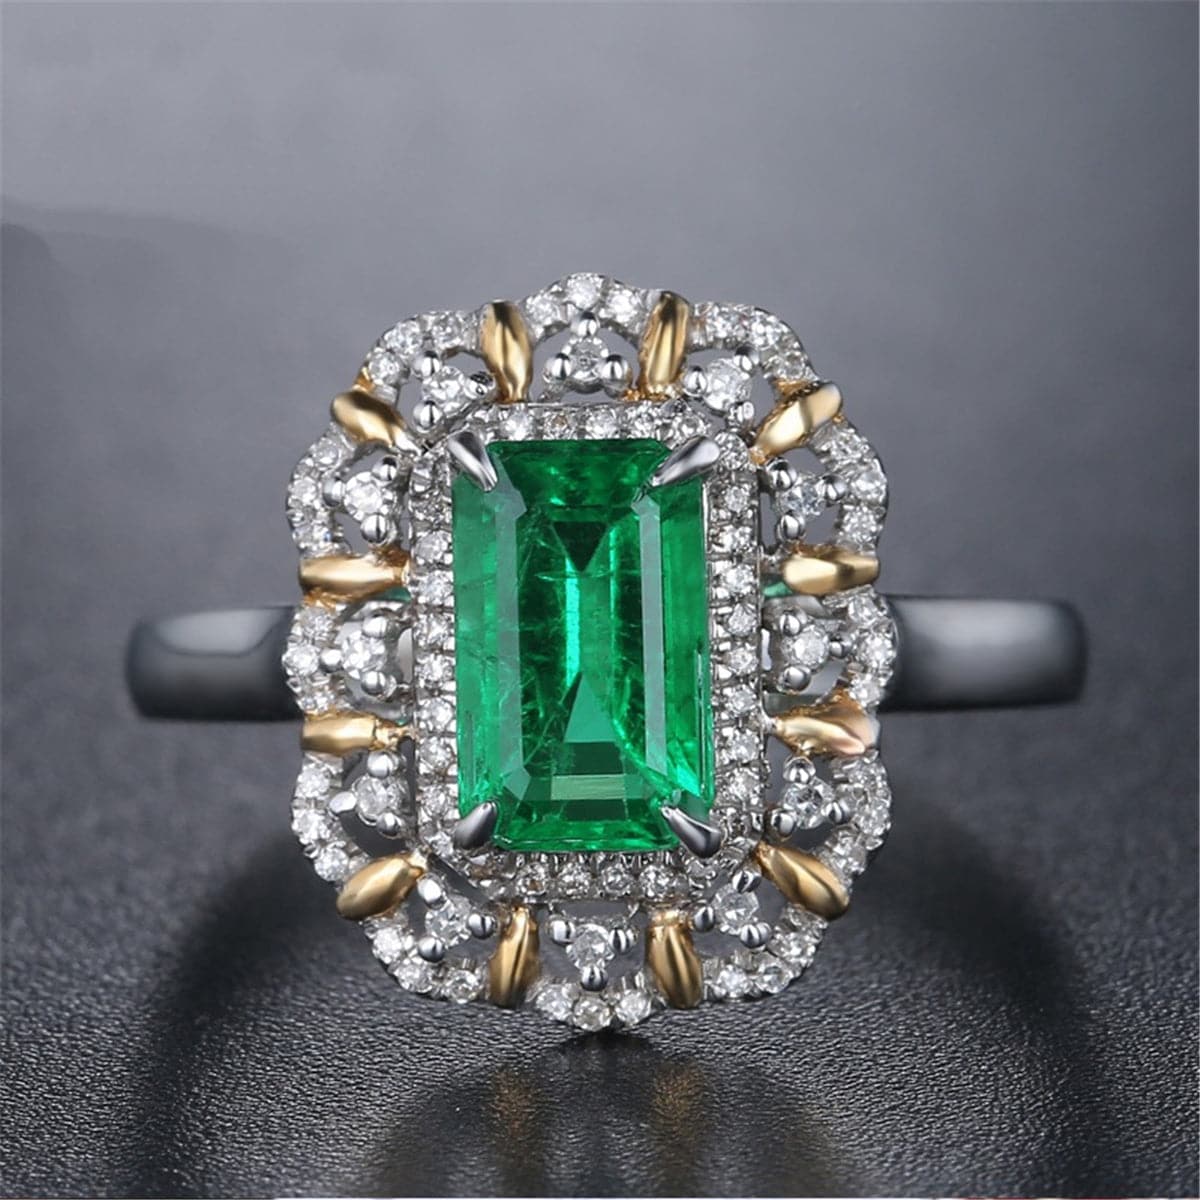 Green cubic zirconia & Crystal Floral Halo Ring - streetregion